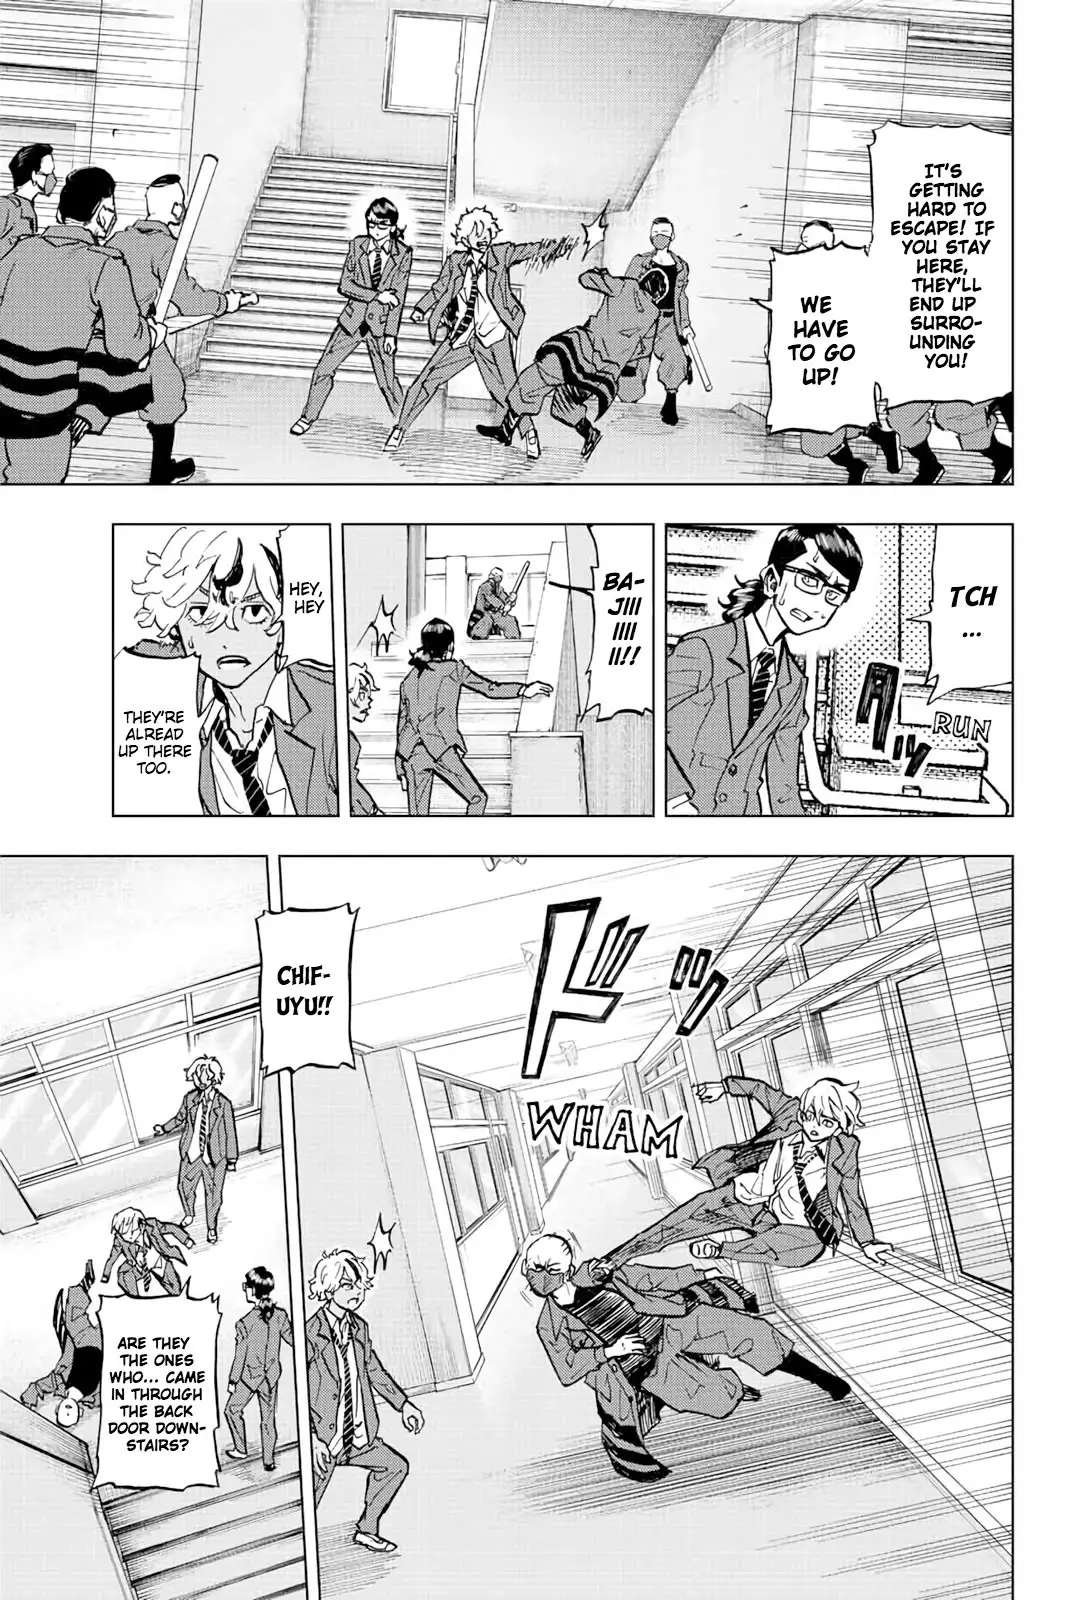 Tokyo Revengers: Letter From Keisuke Baji - 5 page 15-71a32c50